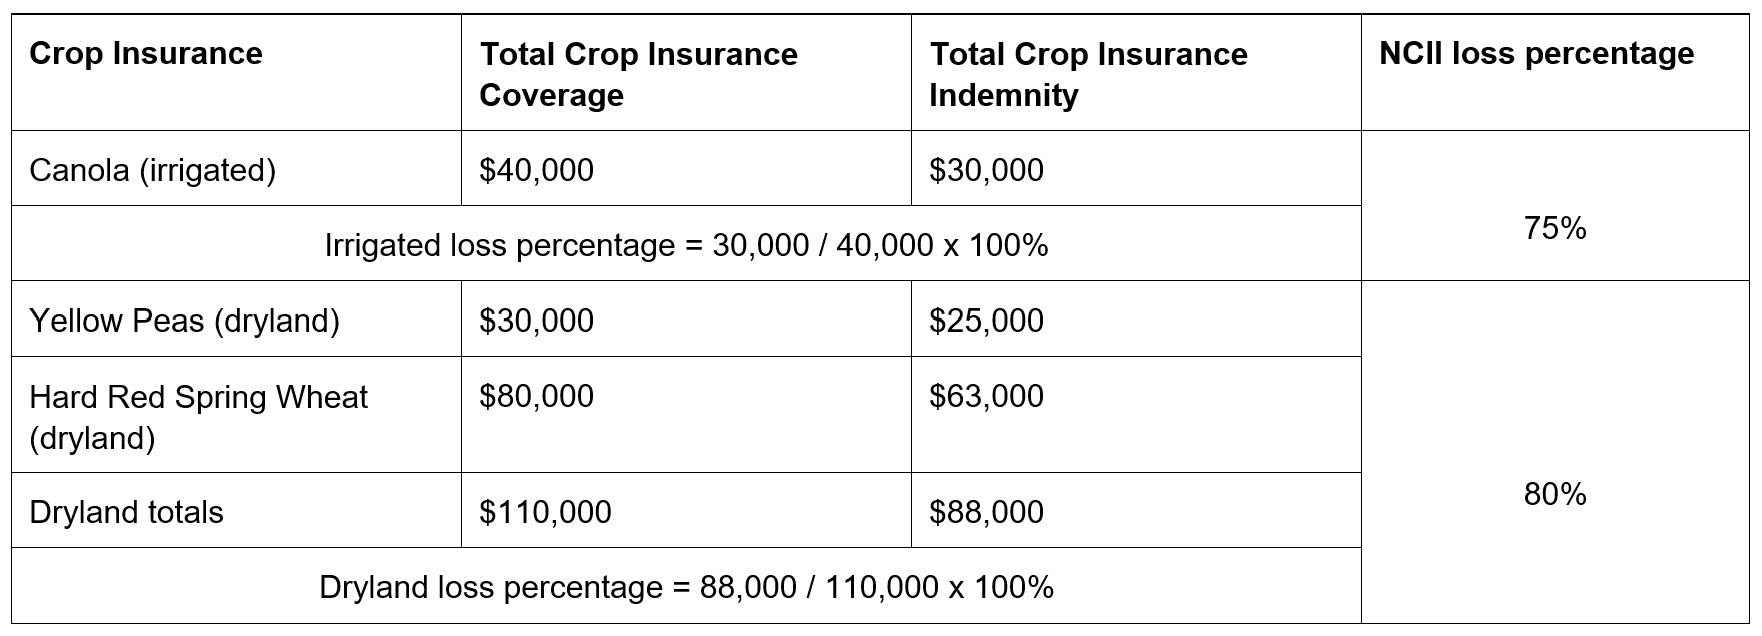 New Crop Insurance Initiative Article 10 Indemnity. Call AFSC for details